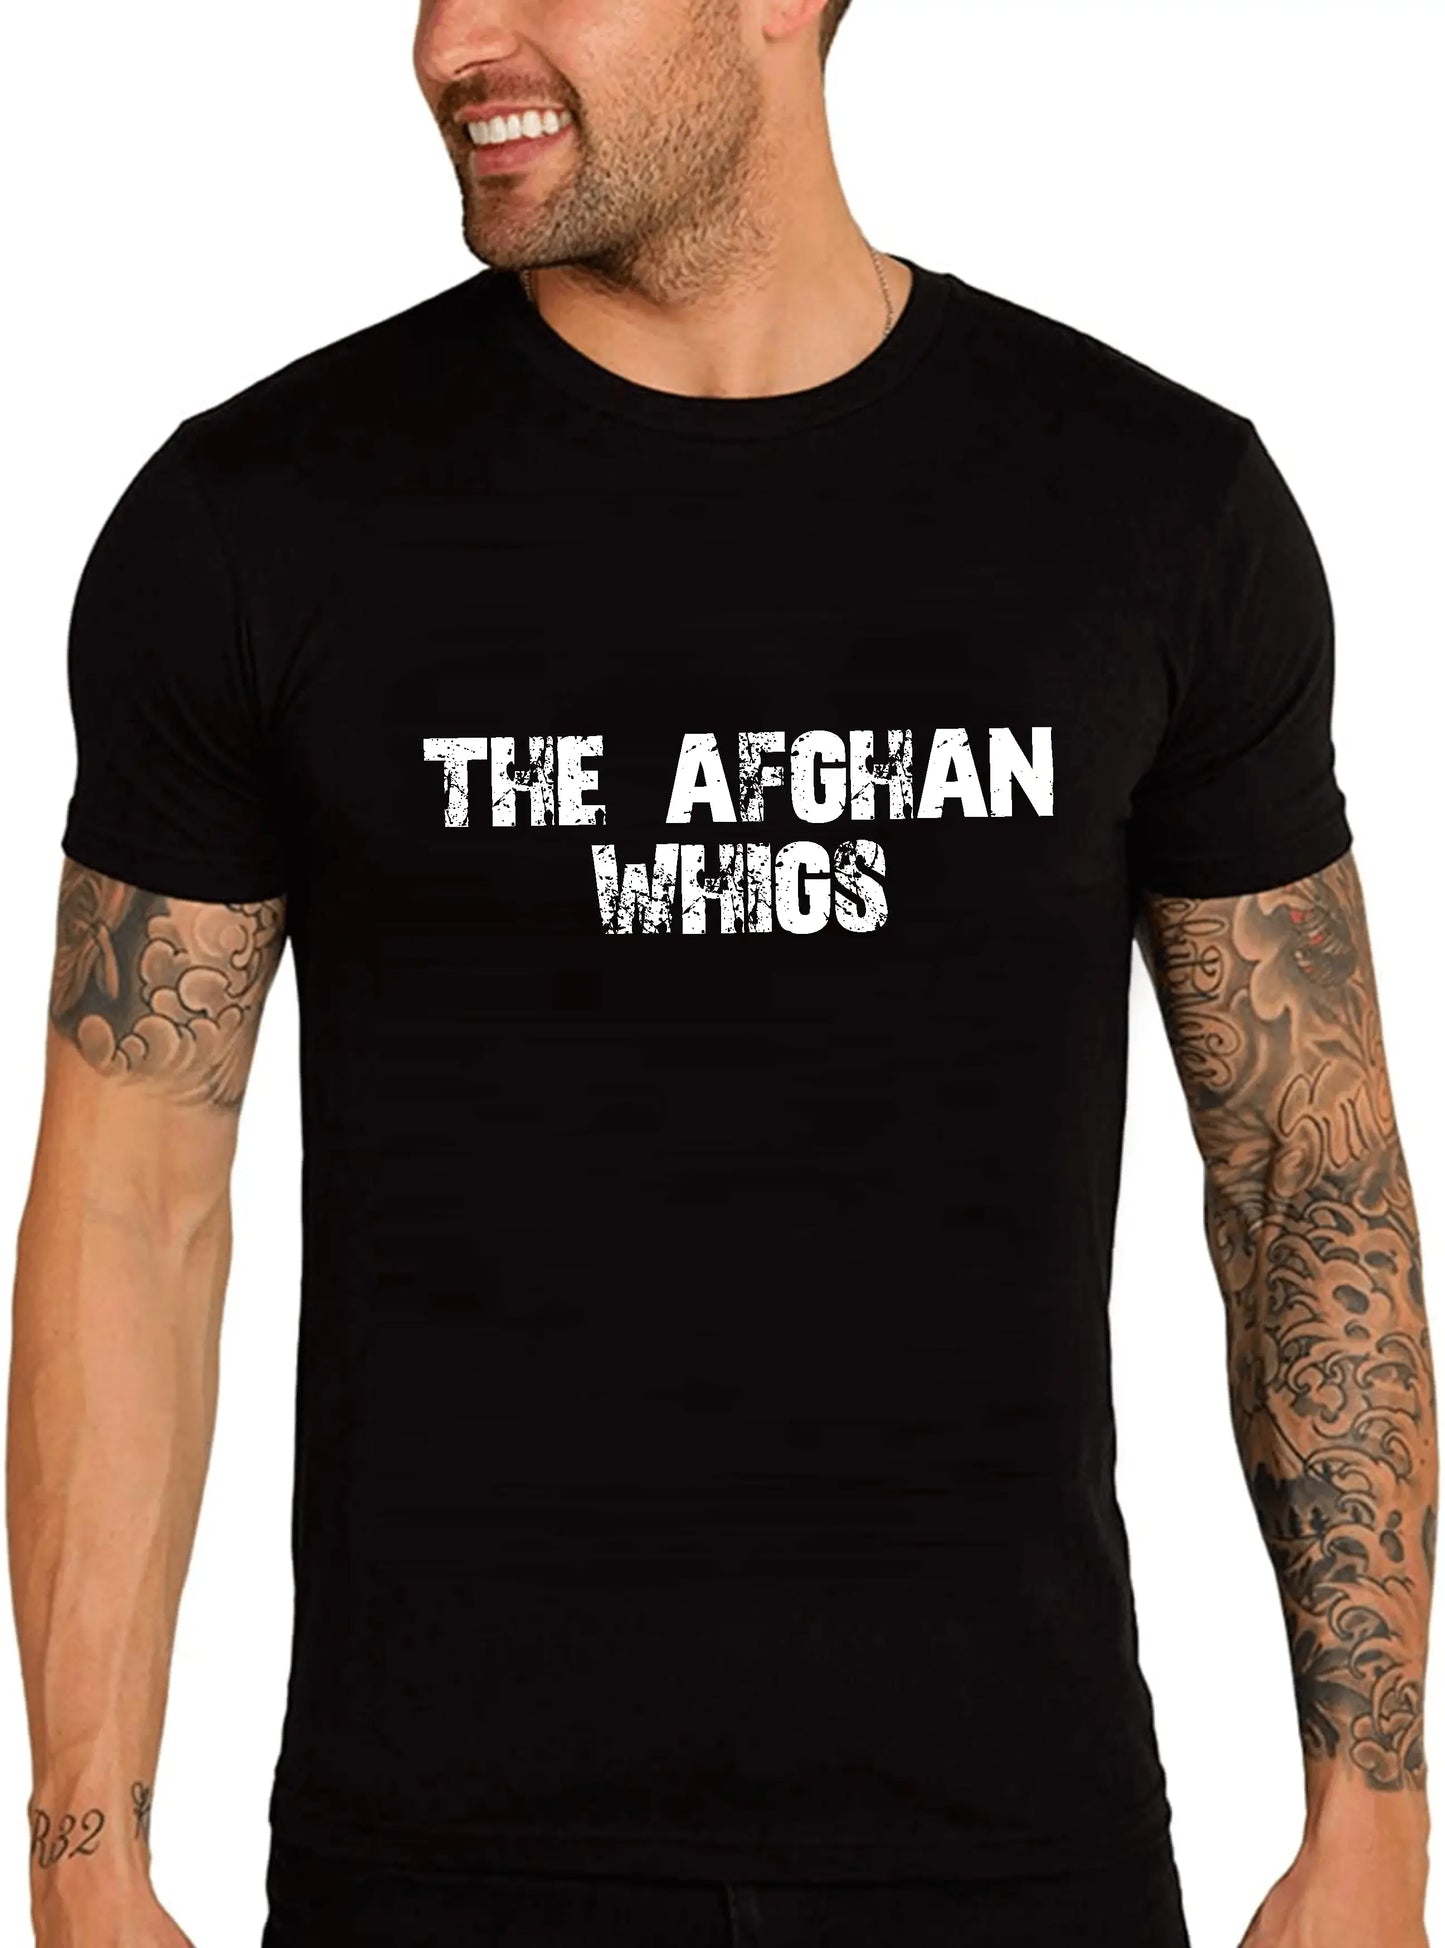 Men's Graphic T-Shirt The Afghan Whigs Eco-Friendly Limited Edition Short Sleeve Tee-Shirt Vintage Birthday Gift Novelty